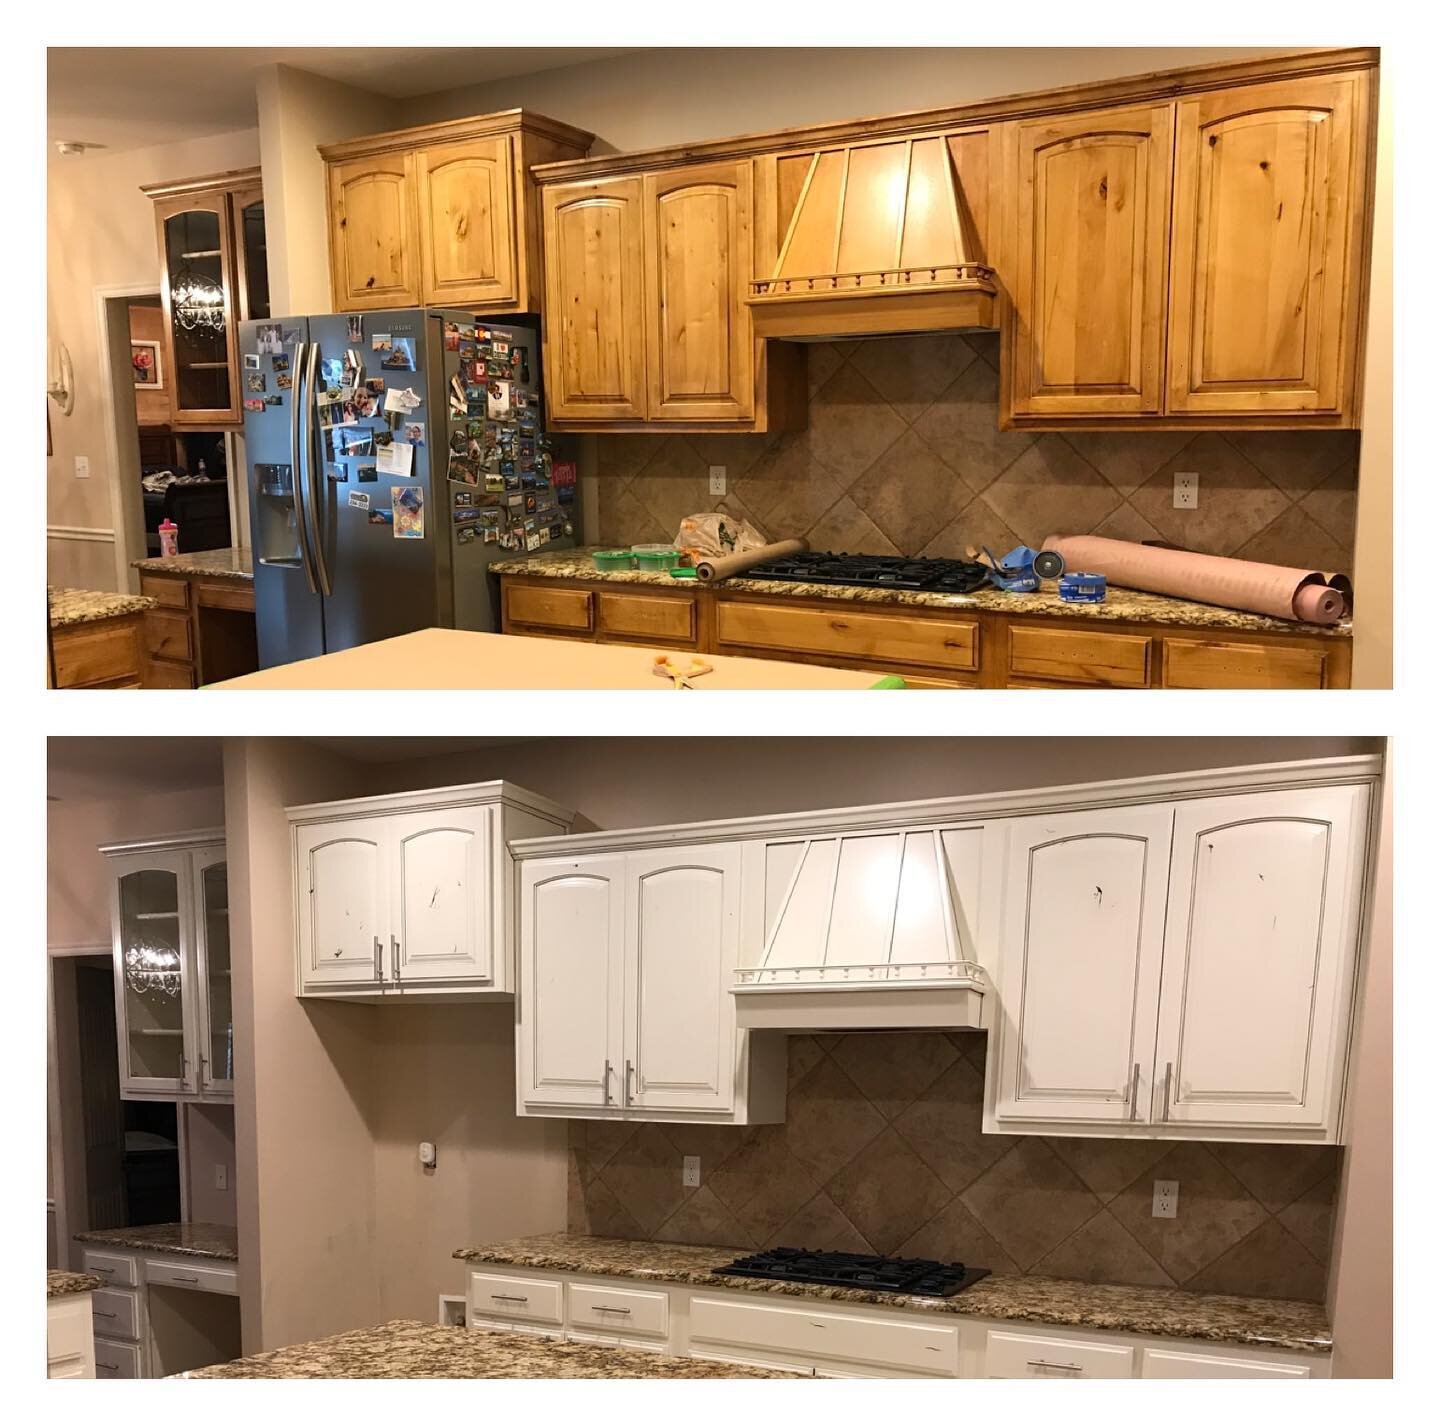 Painting your woodwork completely transforms a space. Get the modern kitchen you&rsquo;ve been dreaming about with Fresh Start Refinishing! Contact us today for a free estimate or more information!

#cabinetpainting #modernkitchen #refinishing